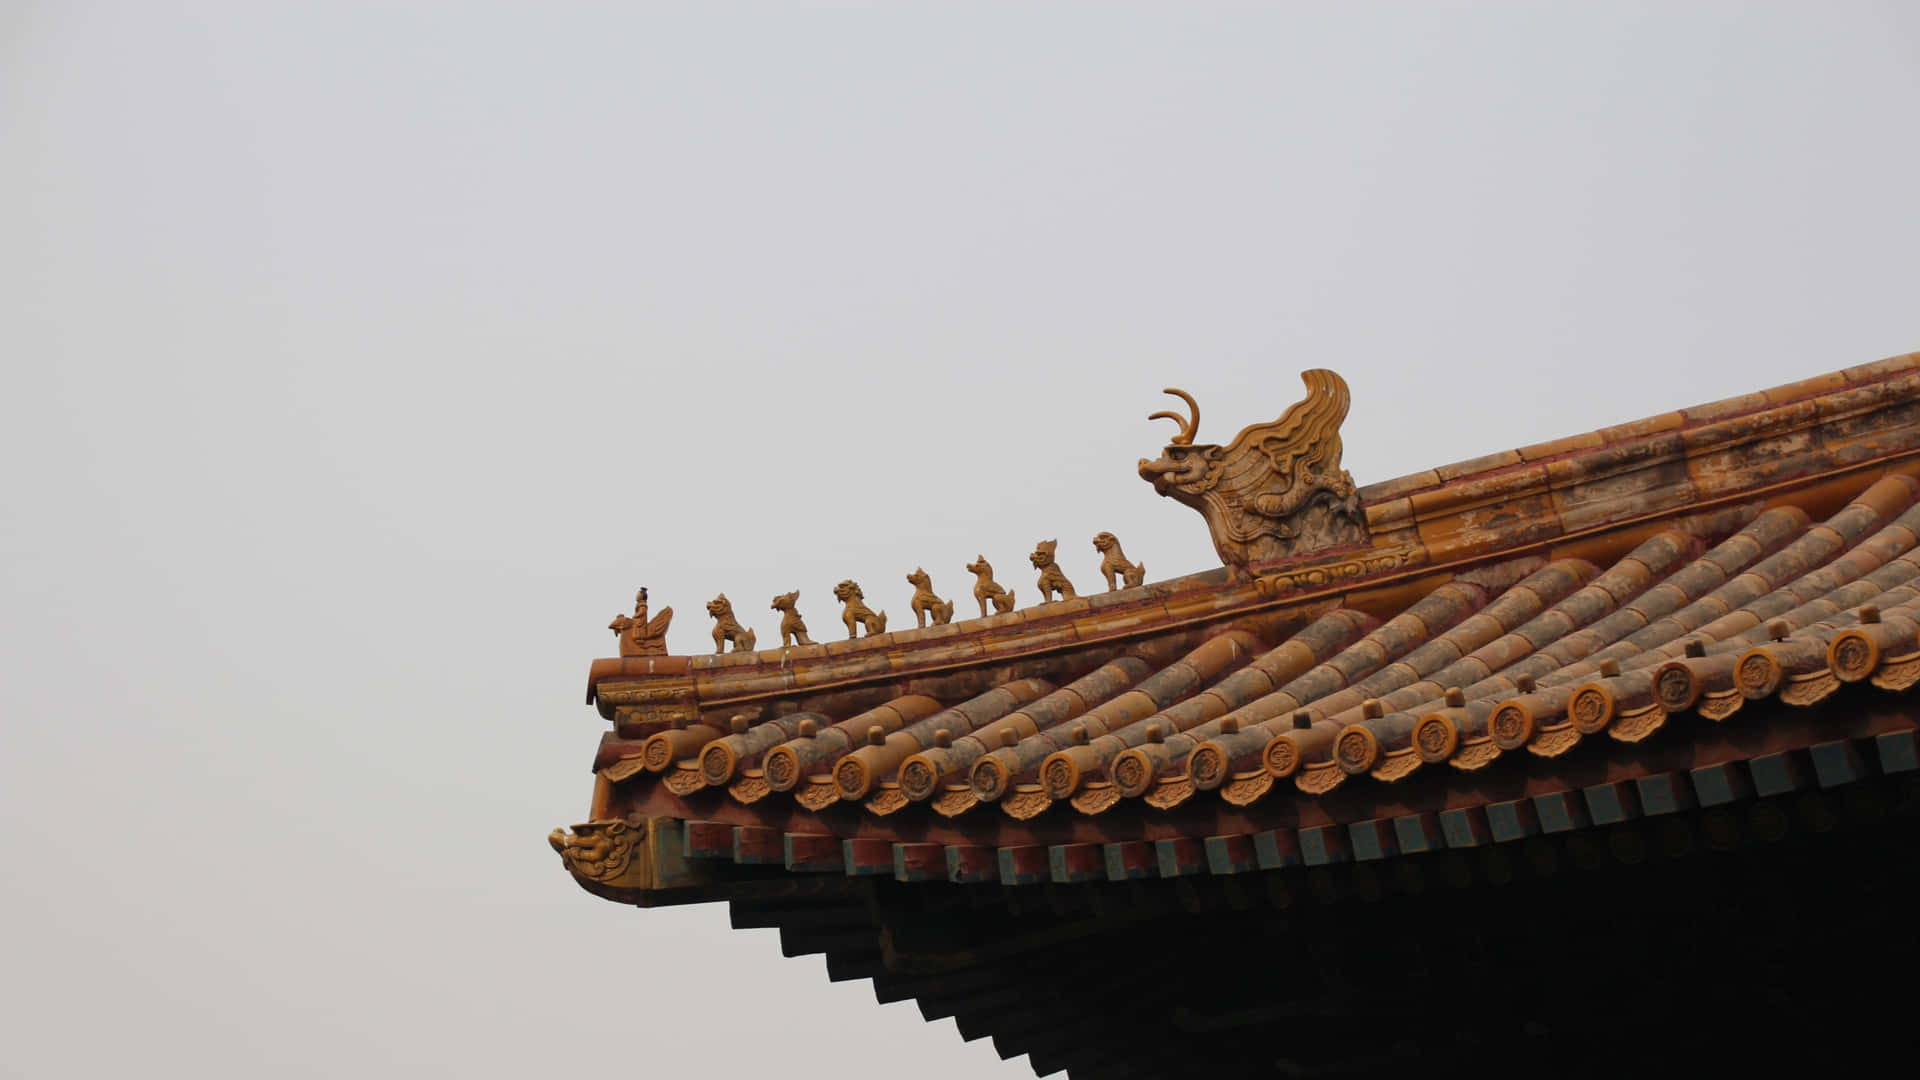 Traditional Chinese The Forbidden City Wallpaper